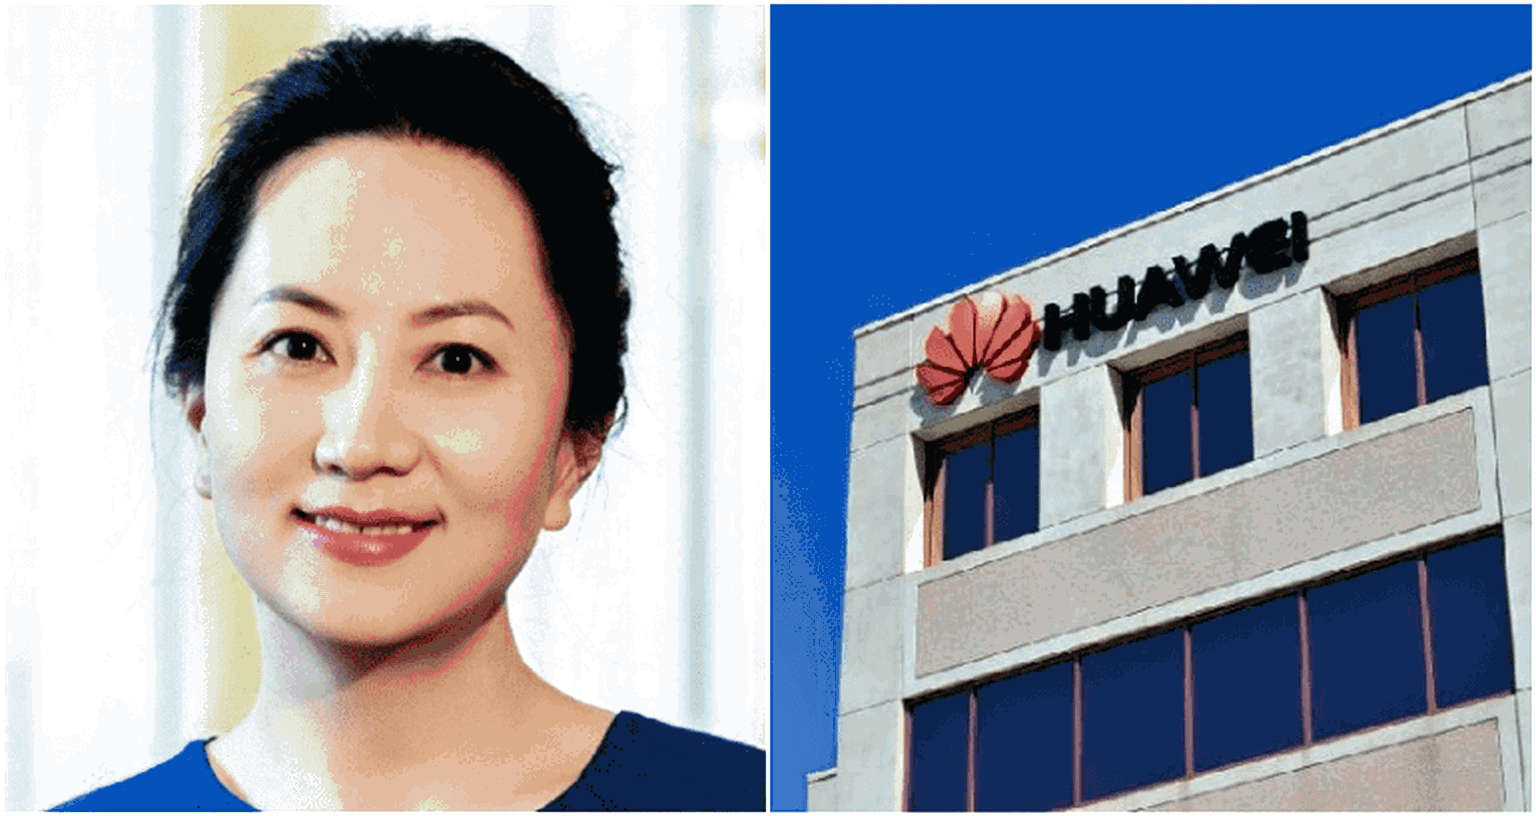 China Threatens U.S. With ‘Grave Consequences’ If Huawei CFO Is Not Released